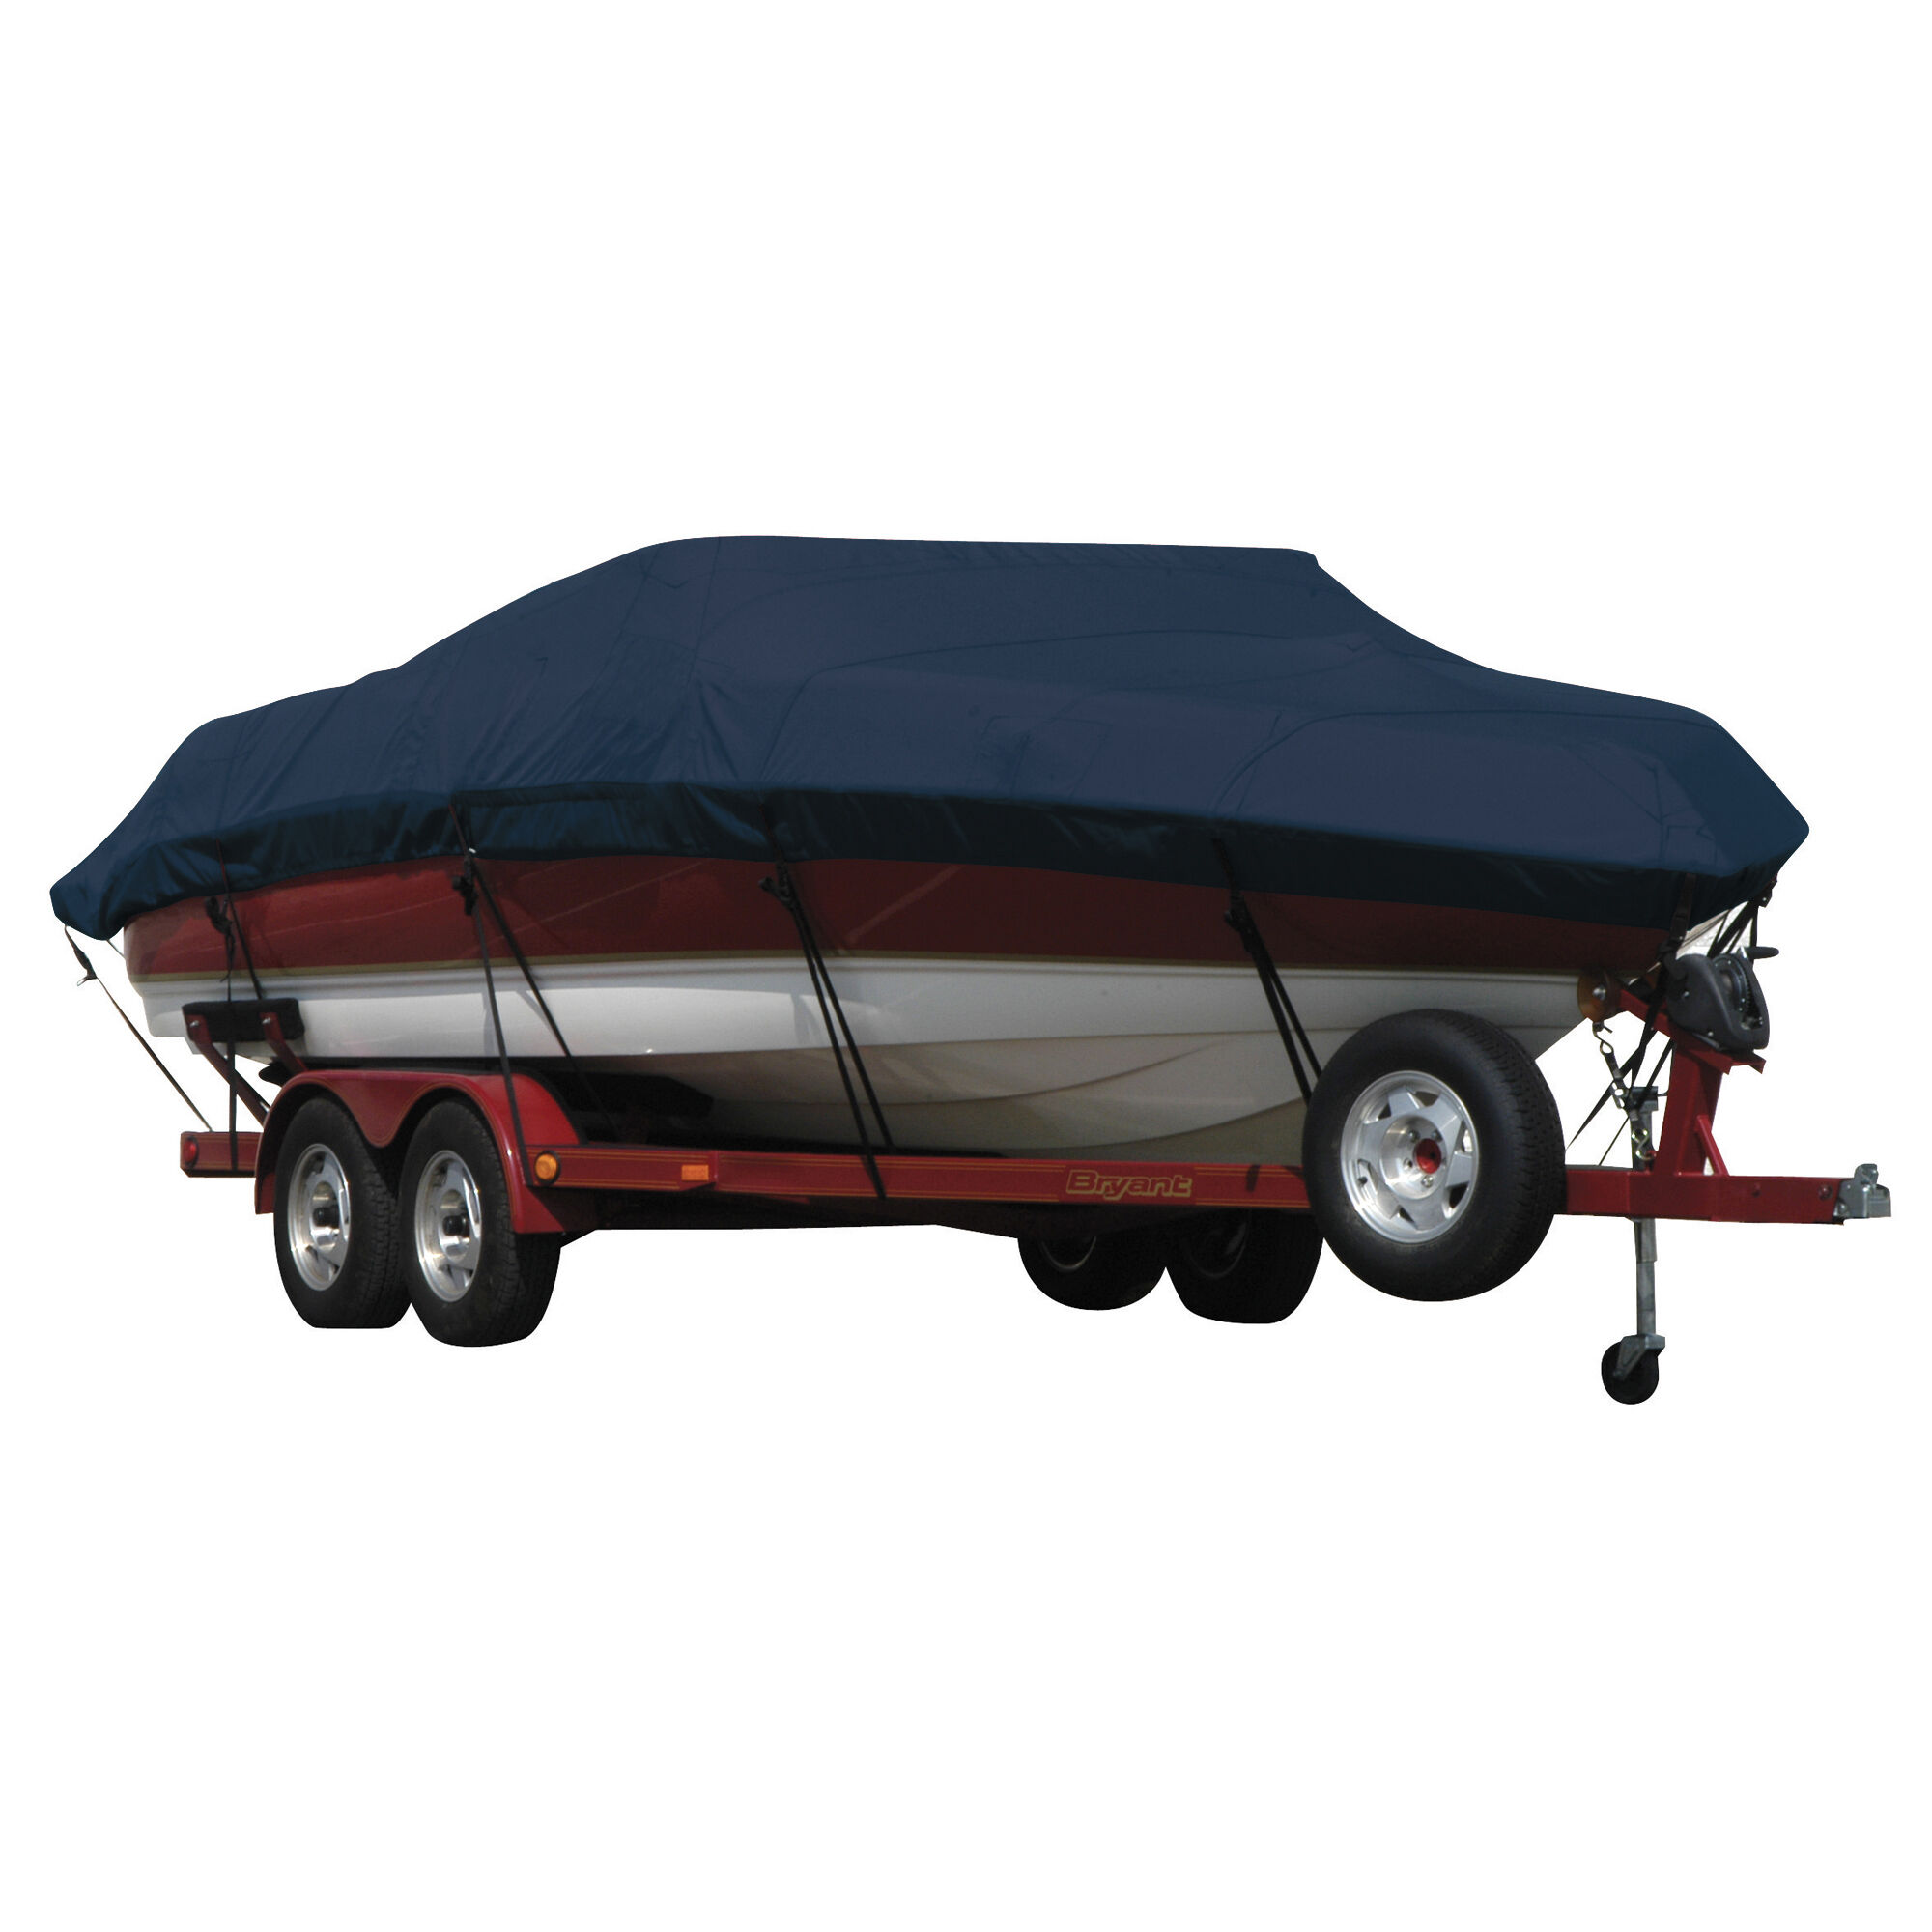 Covermate Exact Fit Sunbrella Boat Cover for Aquapro Inflatables Super Light 901 Super Light 901 O/B. Navy in Navy Blue